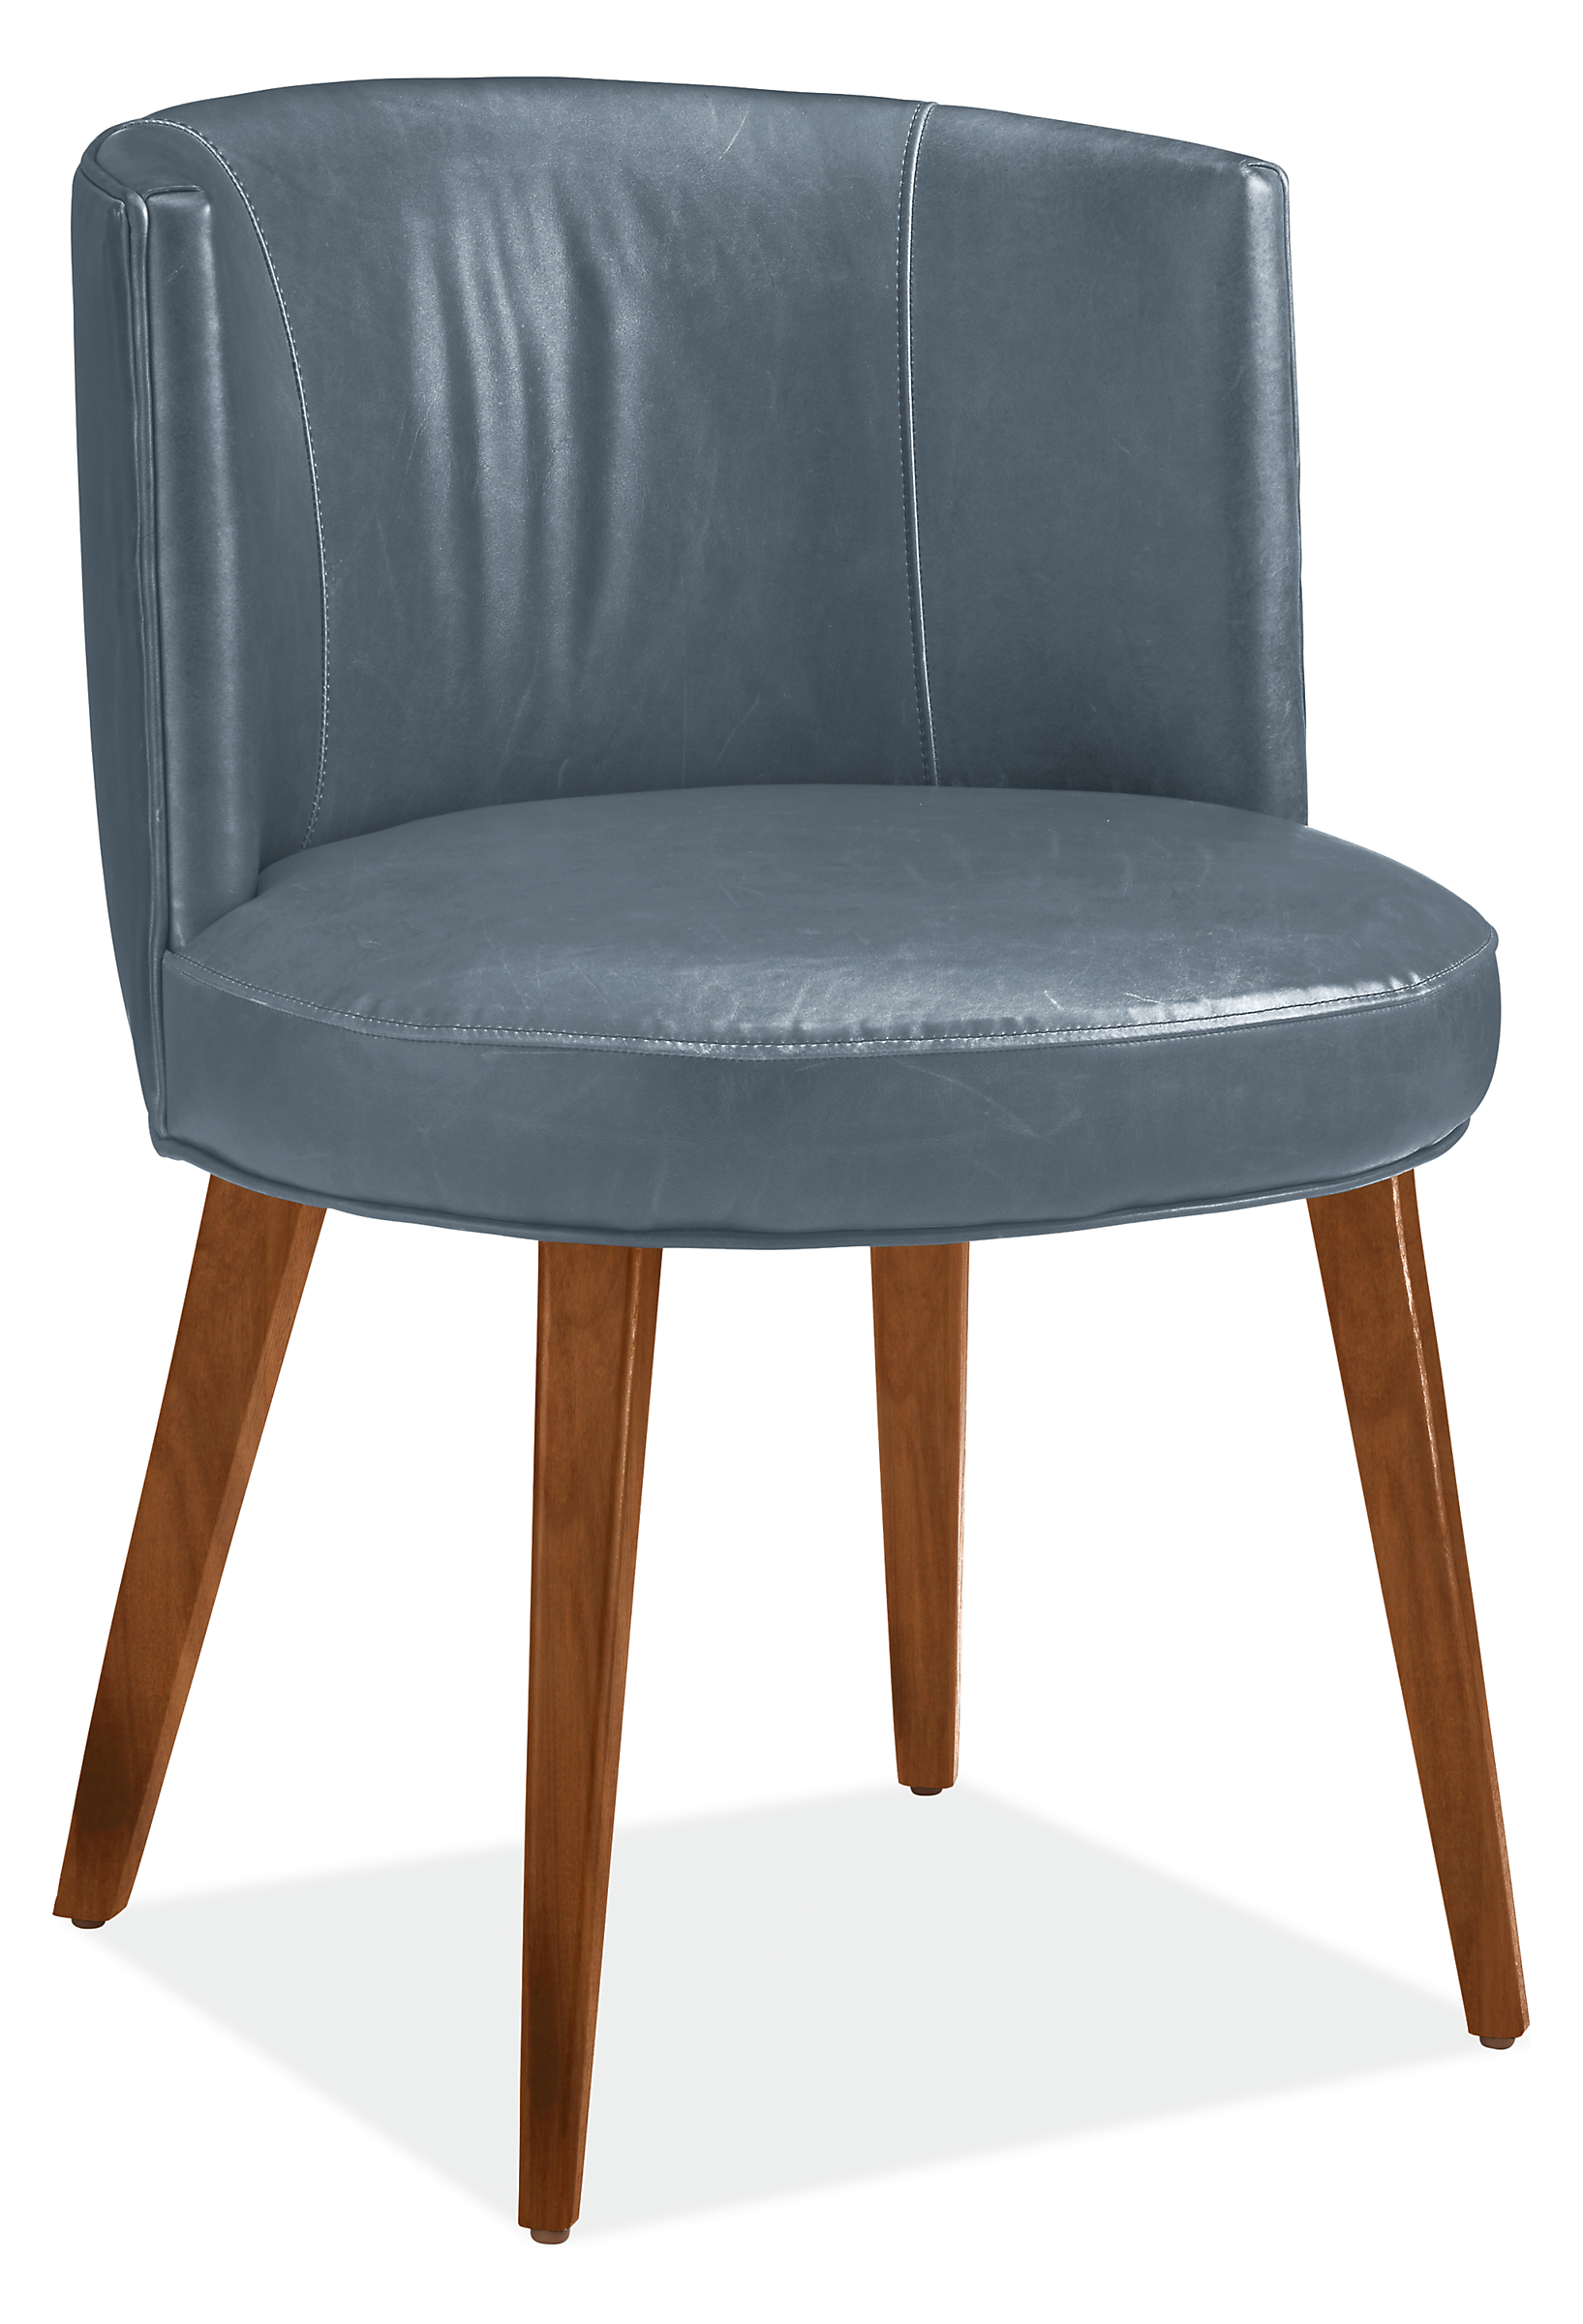 June Side Chair in Vento Cadet Leather with Mocha Legs